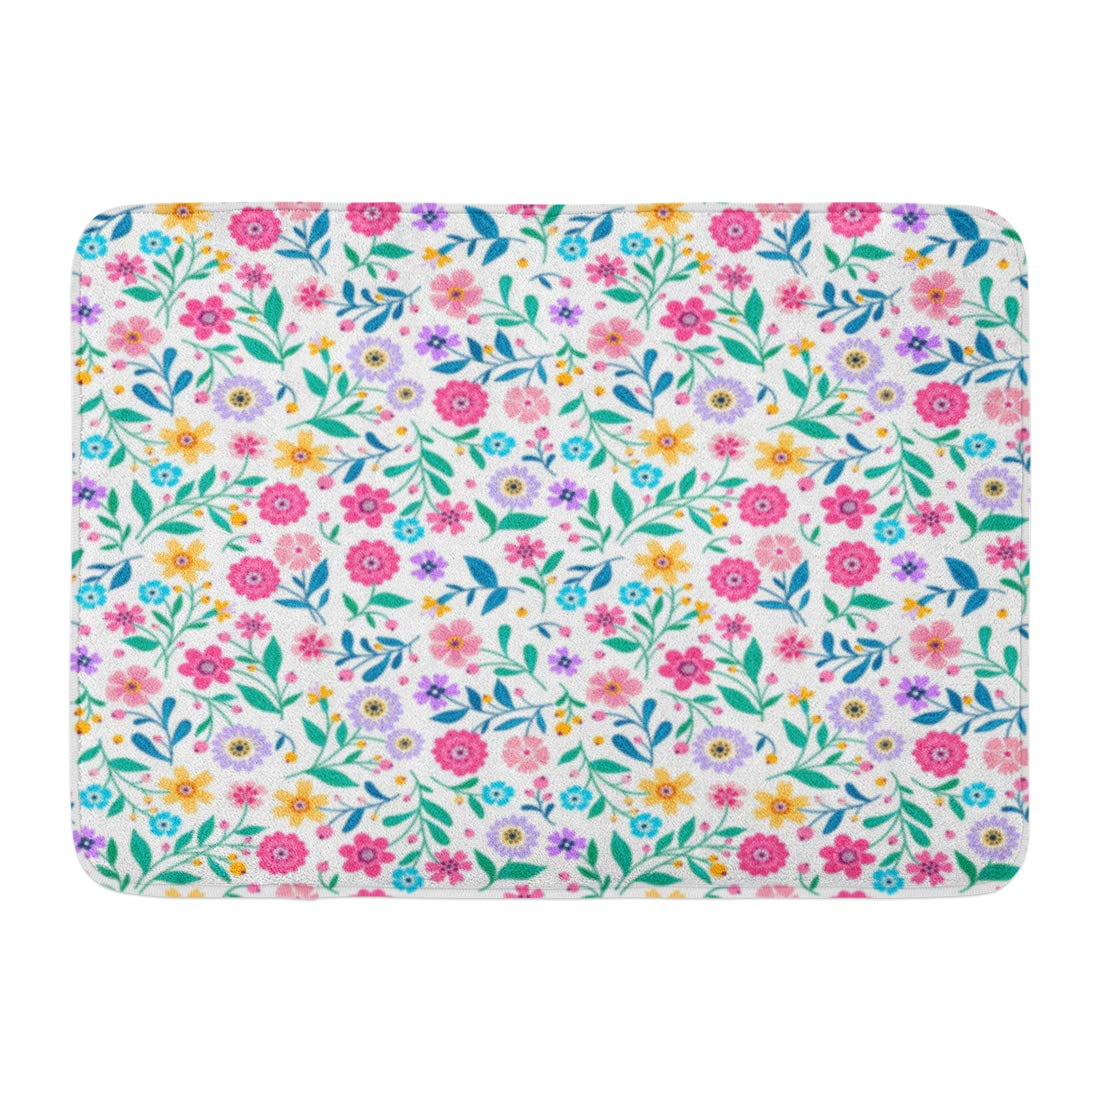 GODPOK Liberty Pink Cute Floral in The Small Flower Ditsy Motifs ...